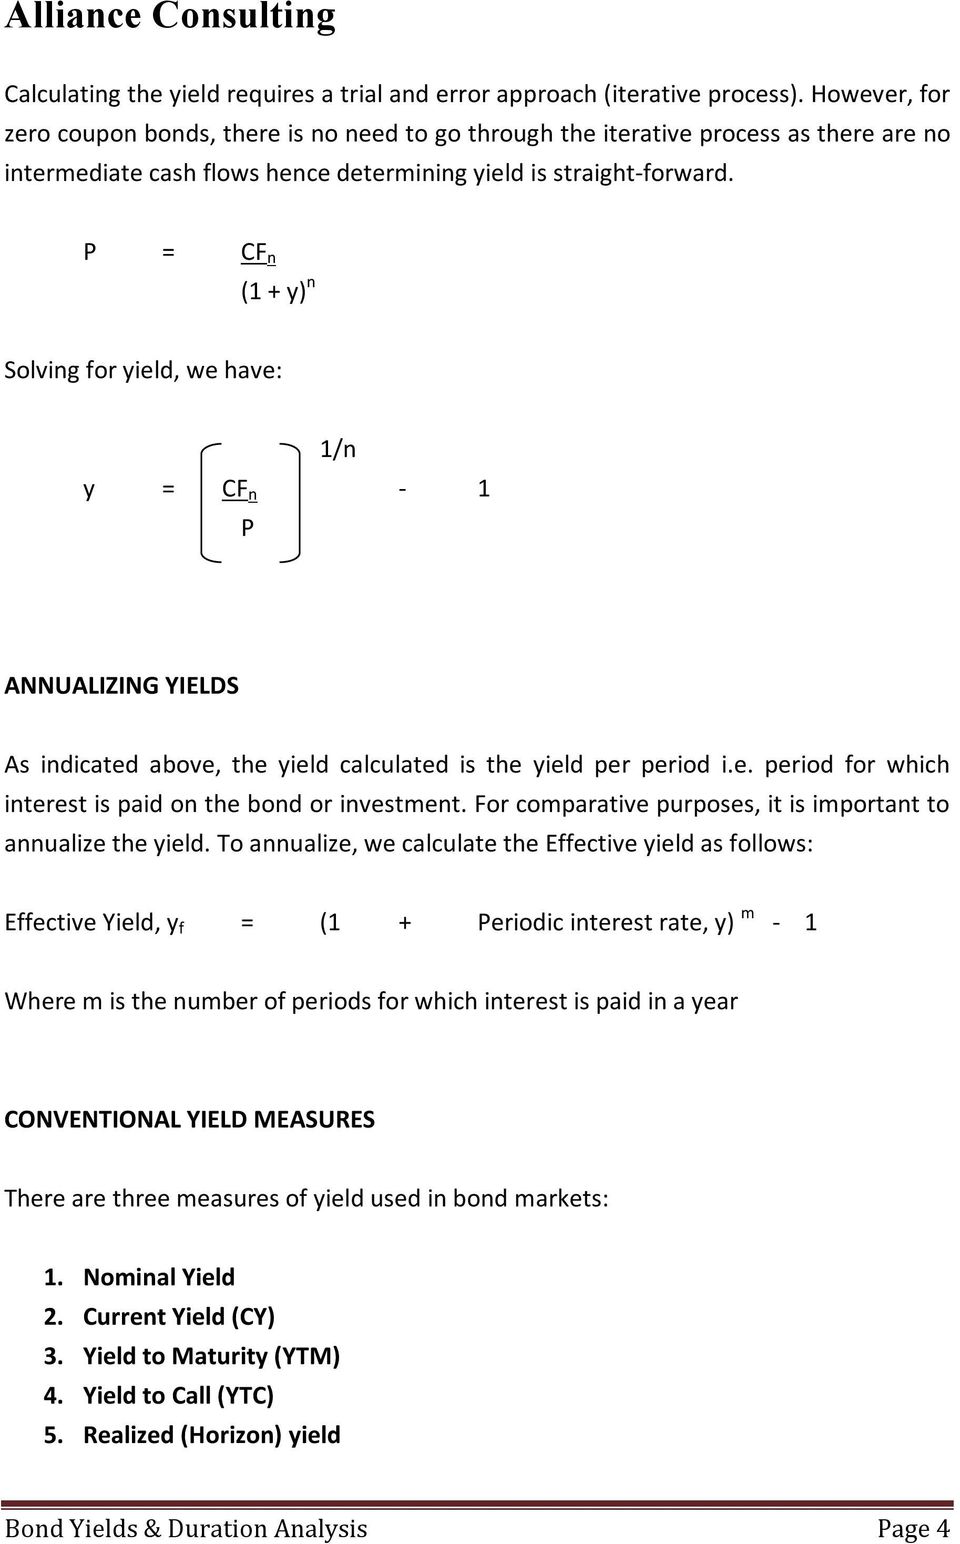 P = CF n (1 + y) n Solving for yield, we have: 1/n y = CF n - 1 P ANNUALIZING YIELDS As indicated above, the yield calculated is the yield per period i.e. period for which interest is paid on the bond or investment.